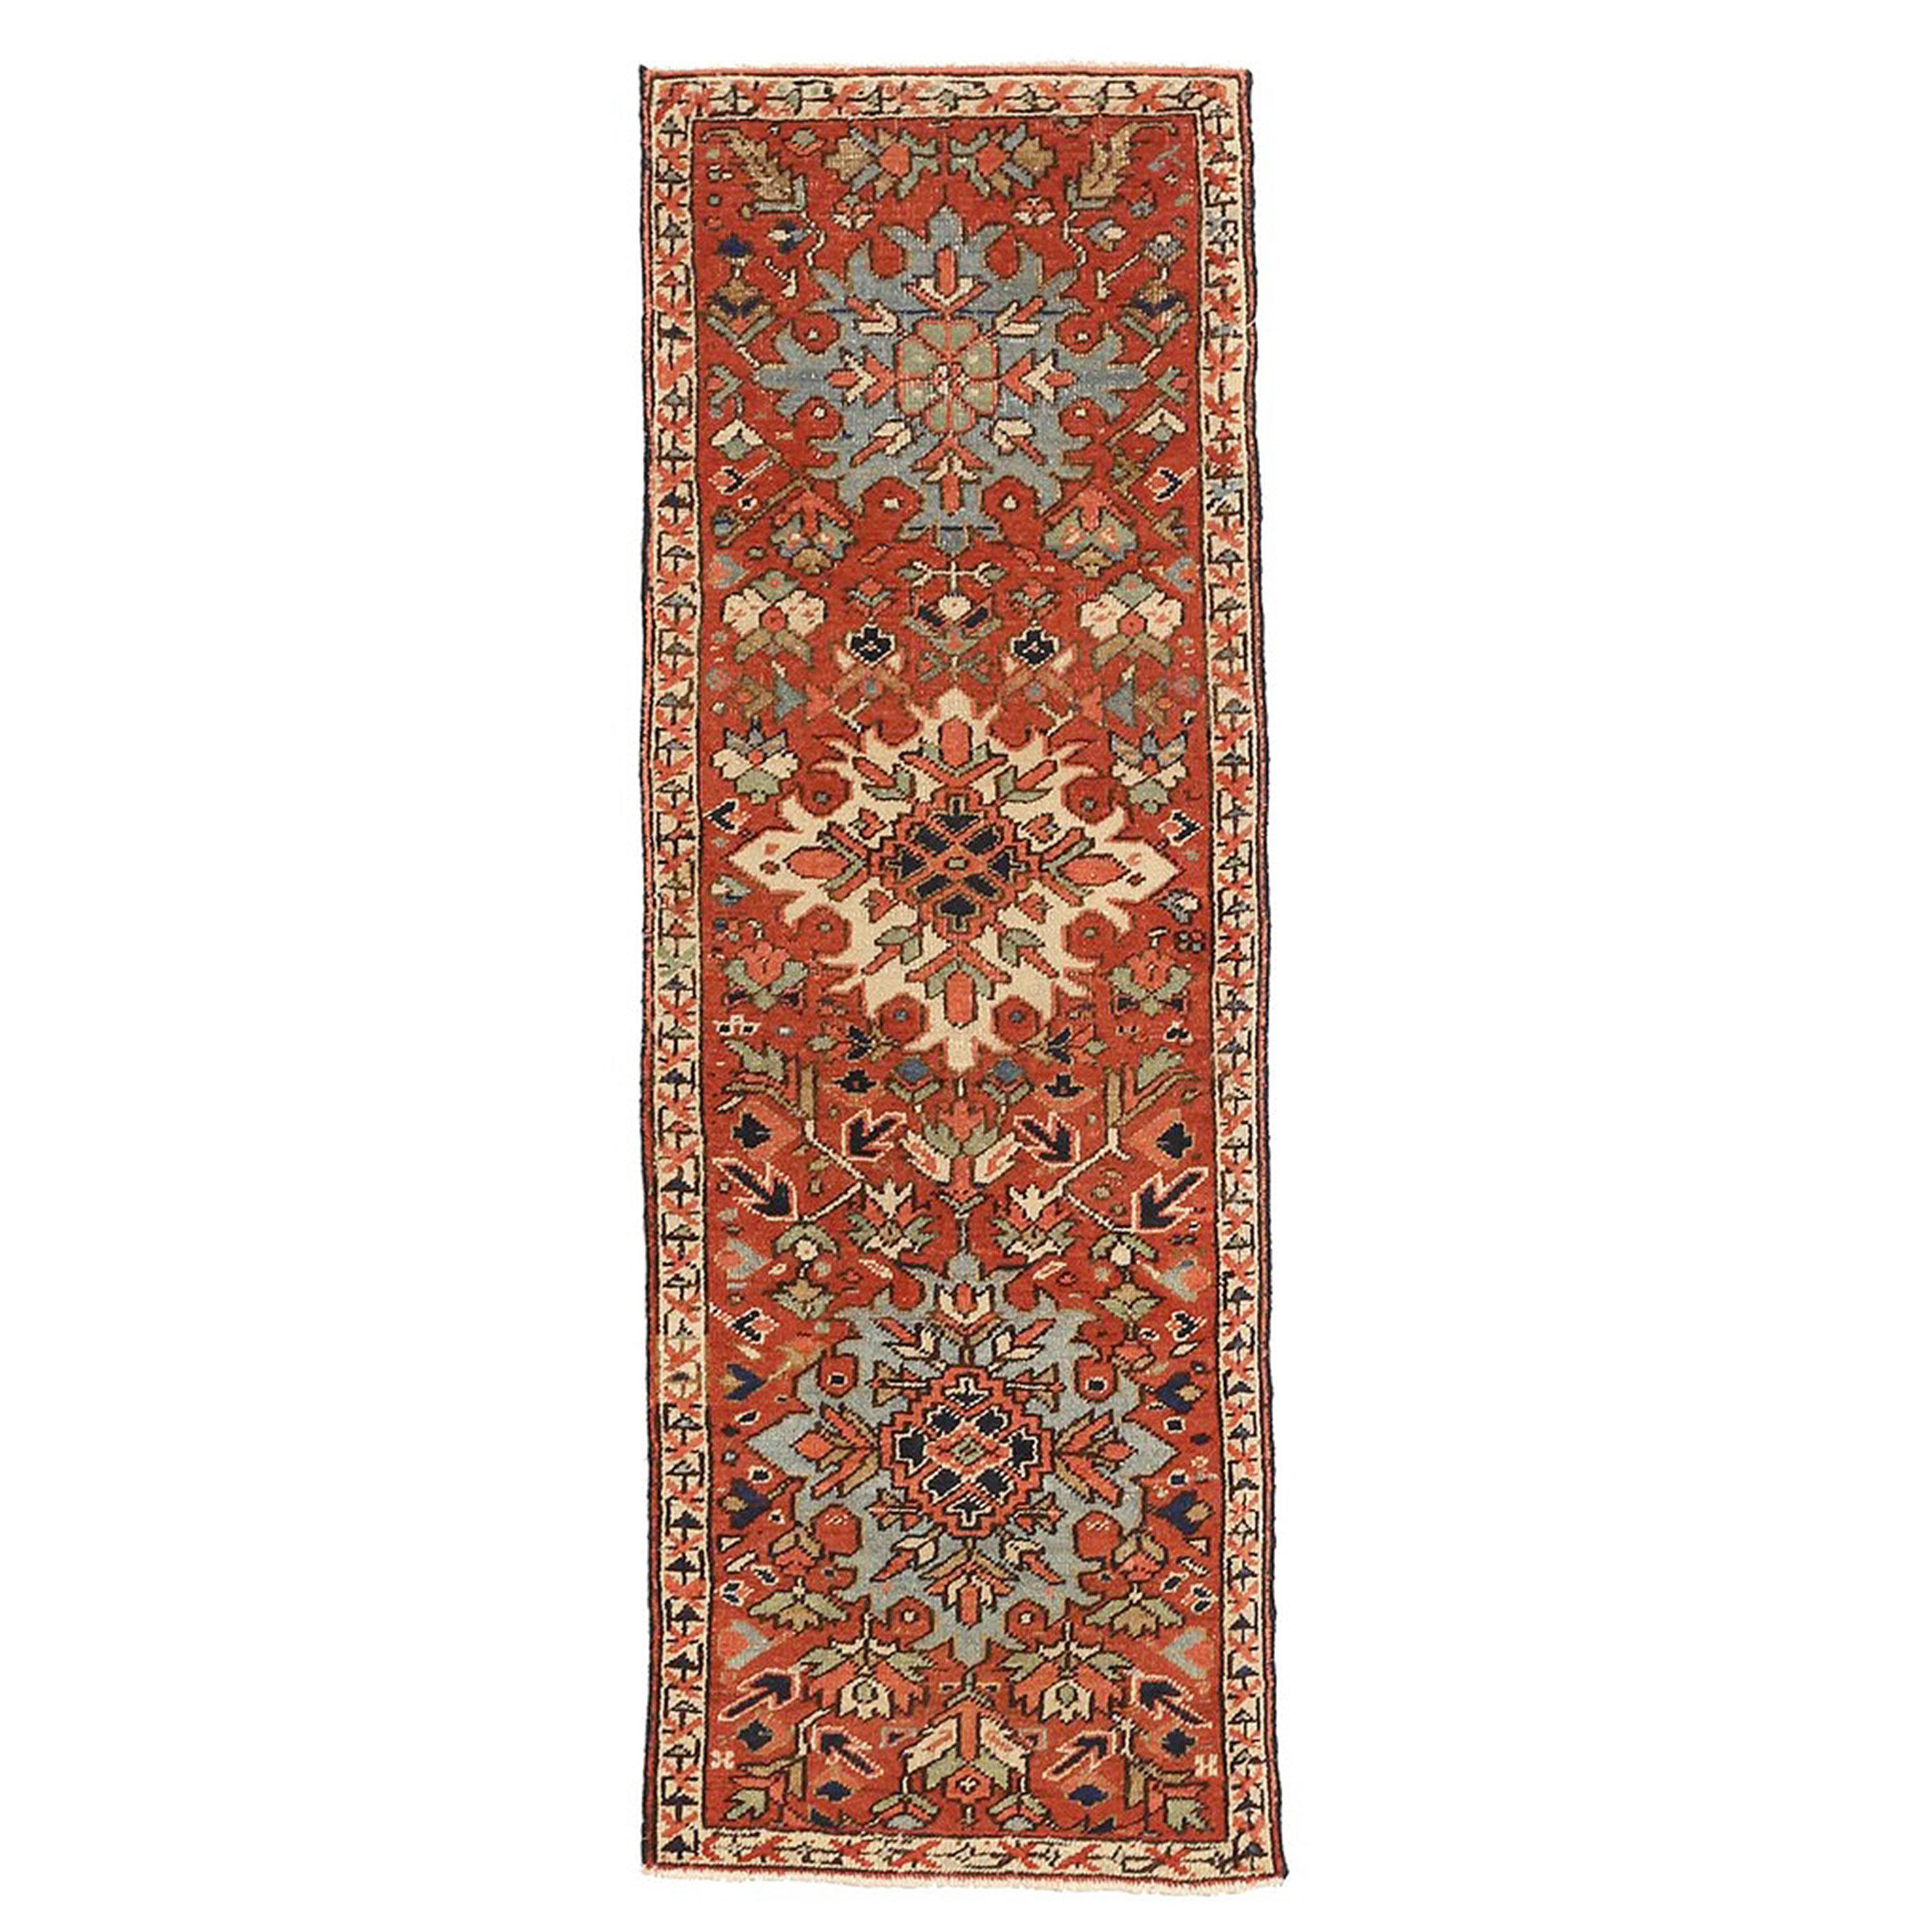 Antique Persian Heriz Runner Rug with Large Colorful Flower Medallions